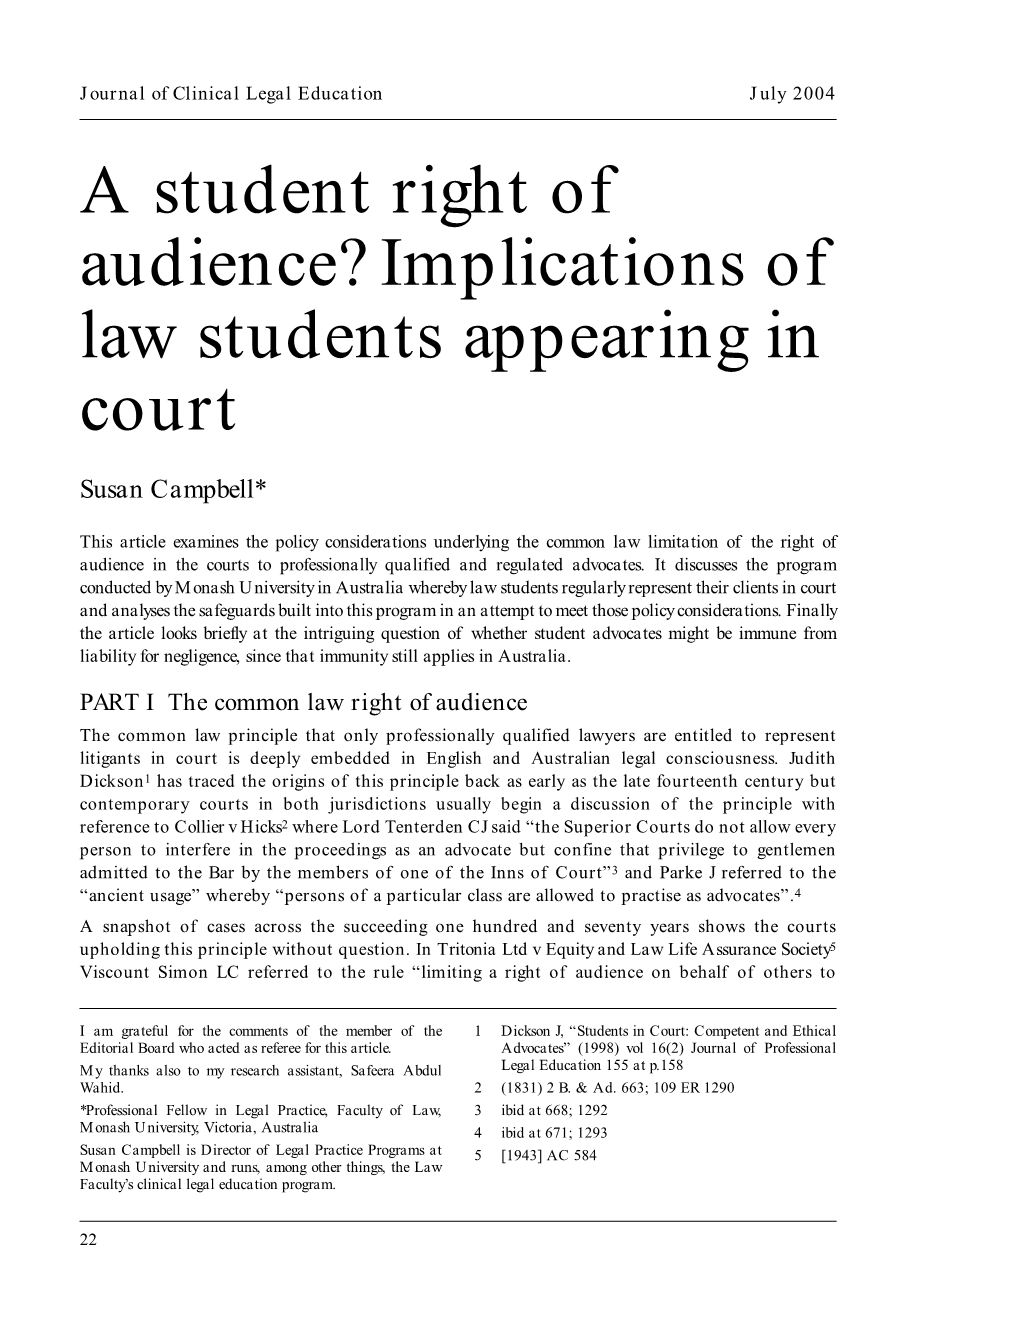 Implications of Law Students Appearing in Court